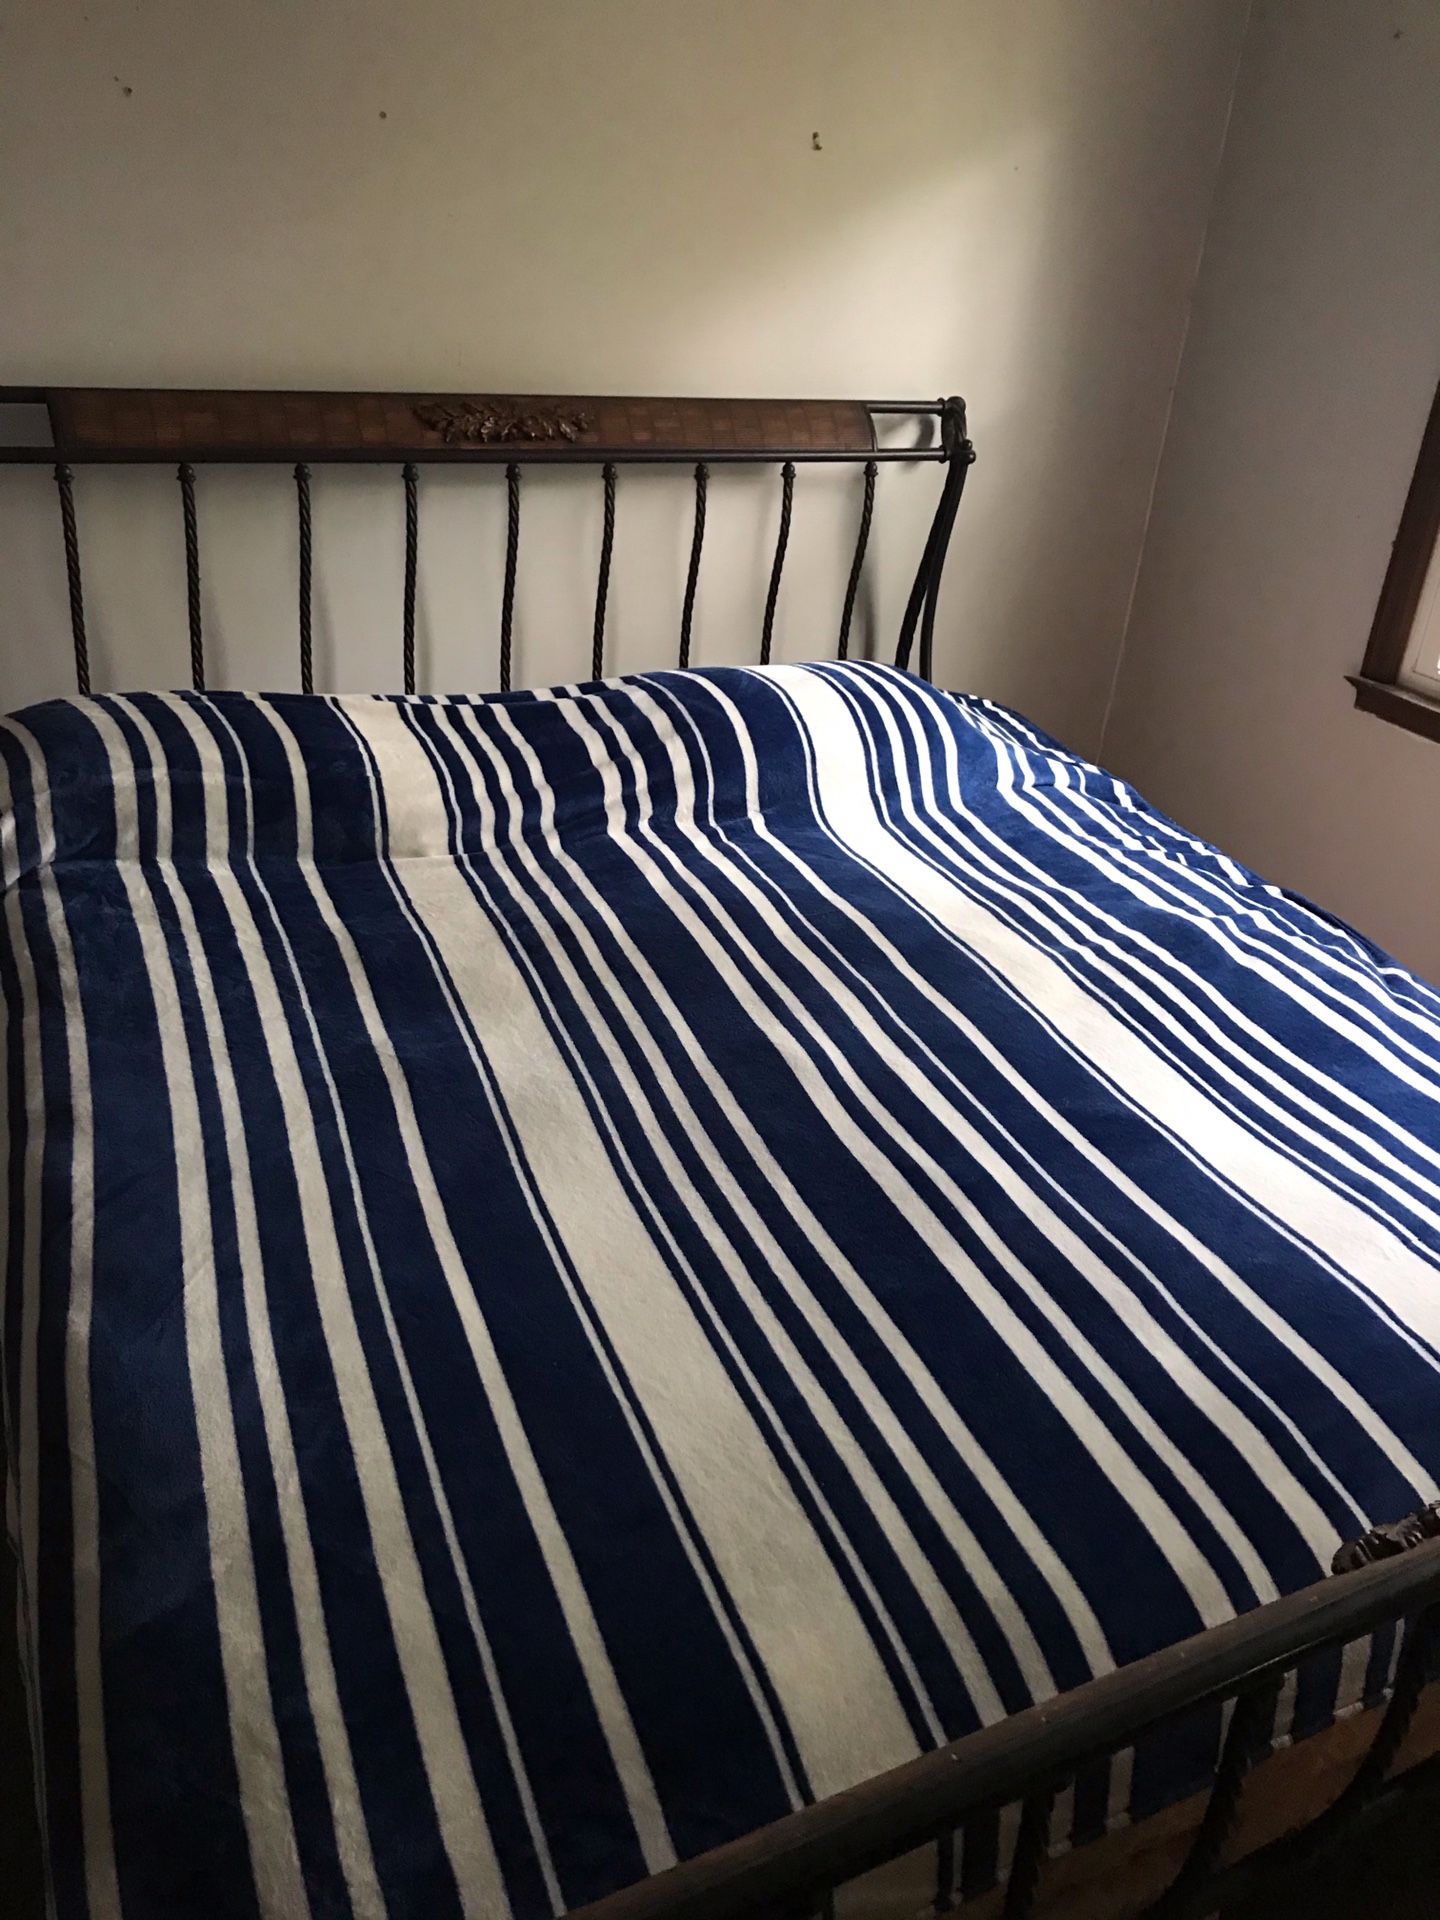 King size bed frame(metal), Mattress, and Box Springs